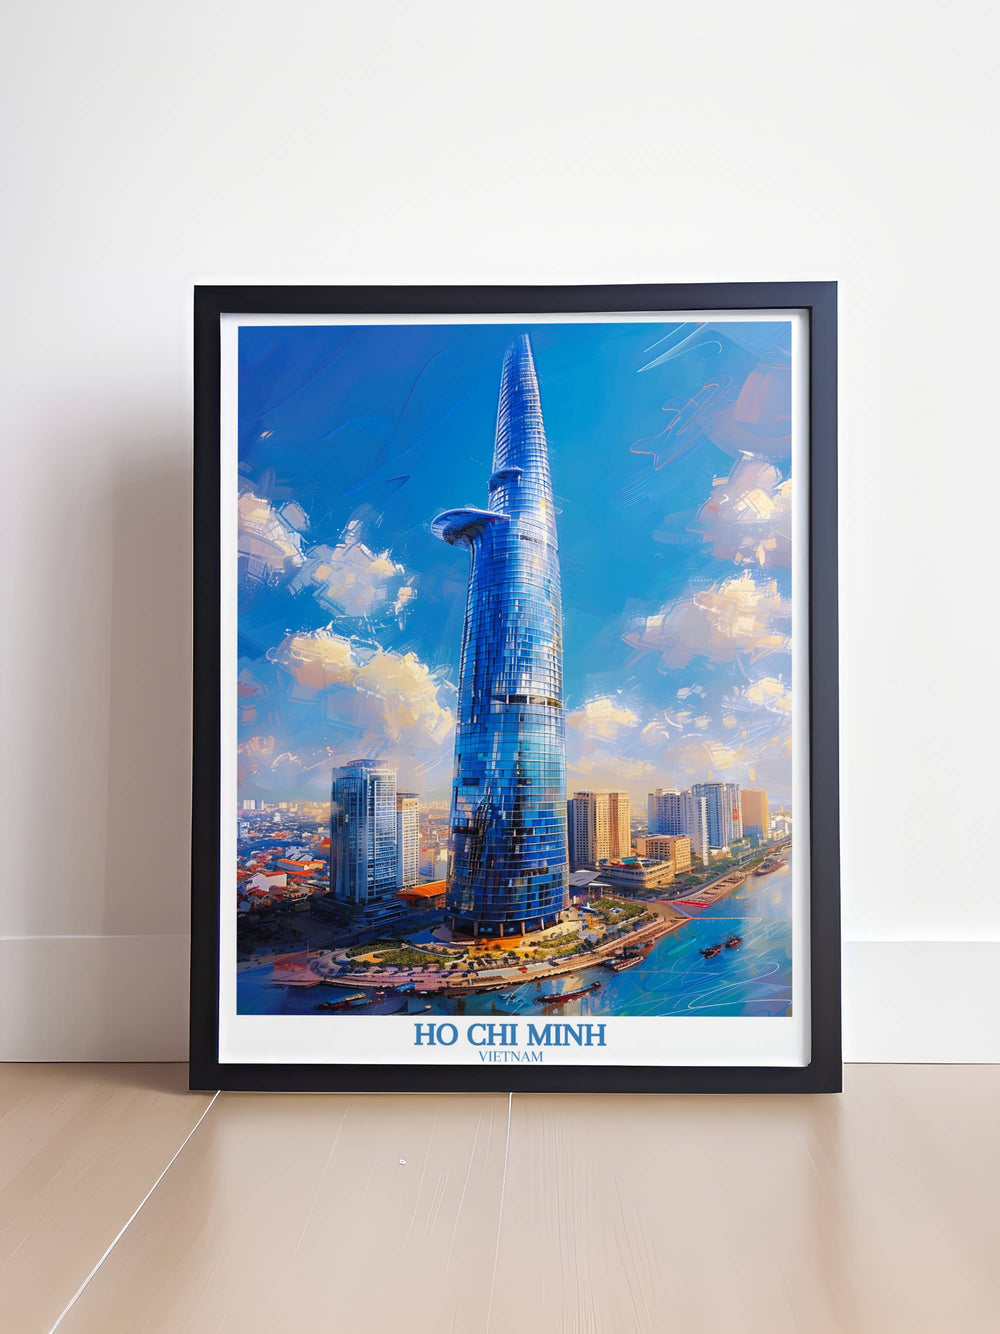 Detailed Ho Chi Minh Vietnam print capturing the citys life with the Bitexco Financial Tower standing tall amidst colorful market scenes and street vendors.